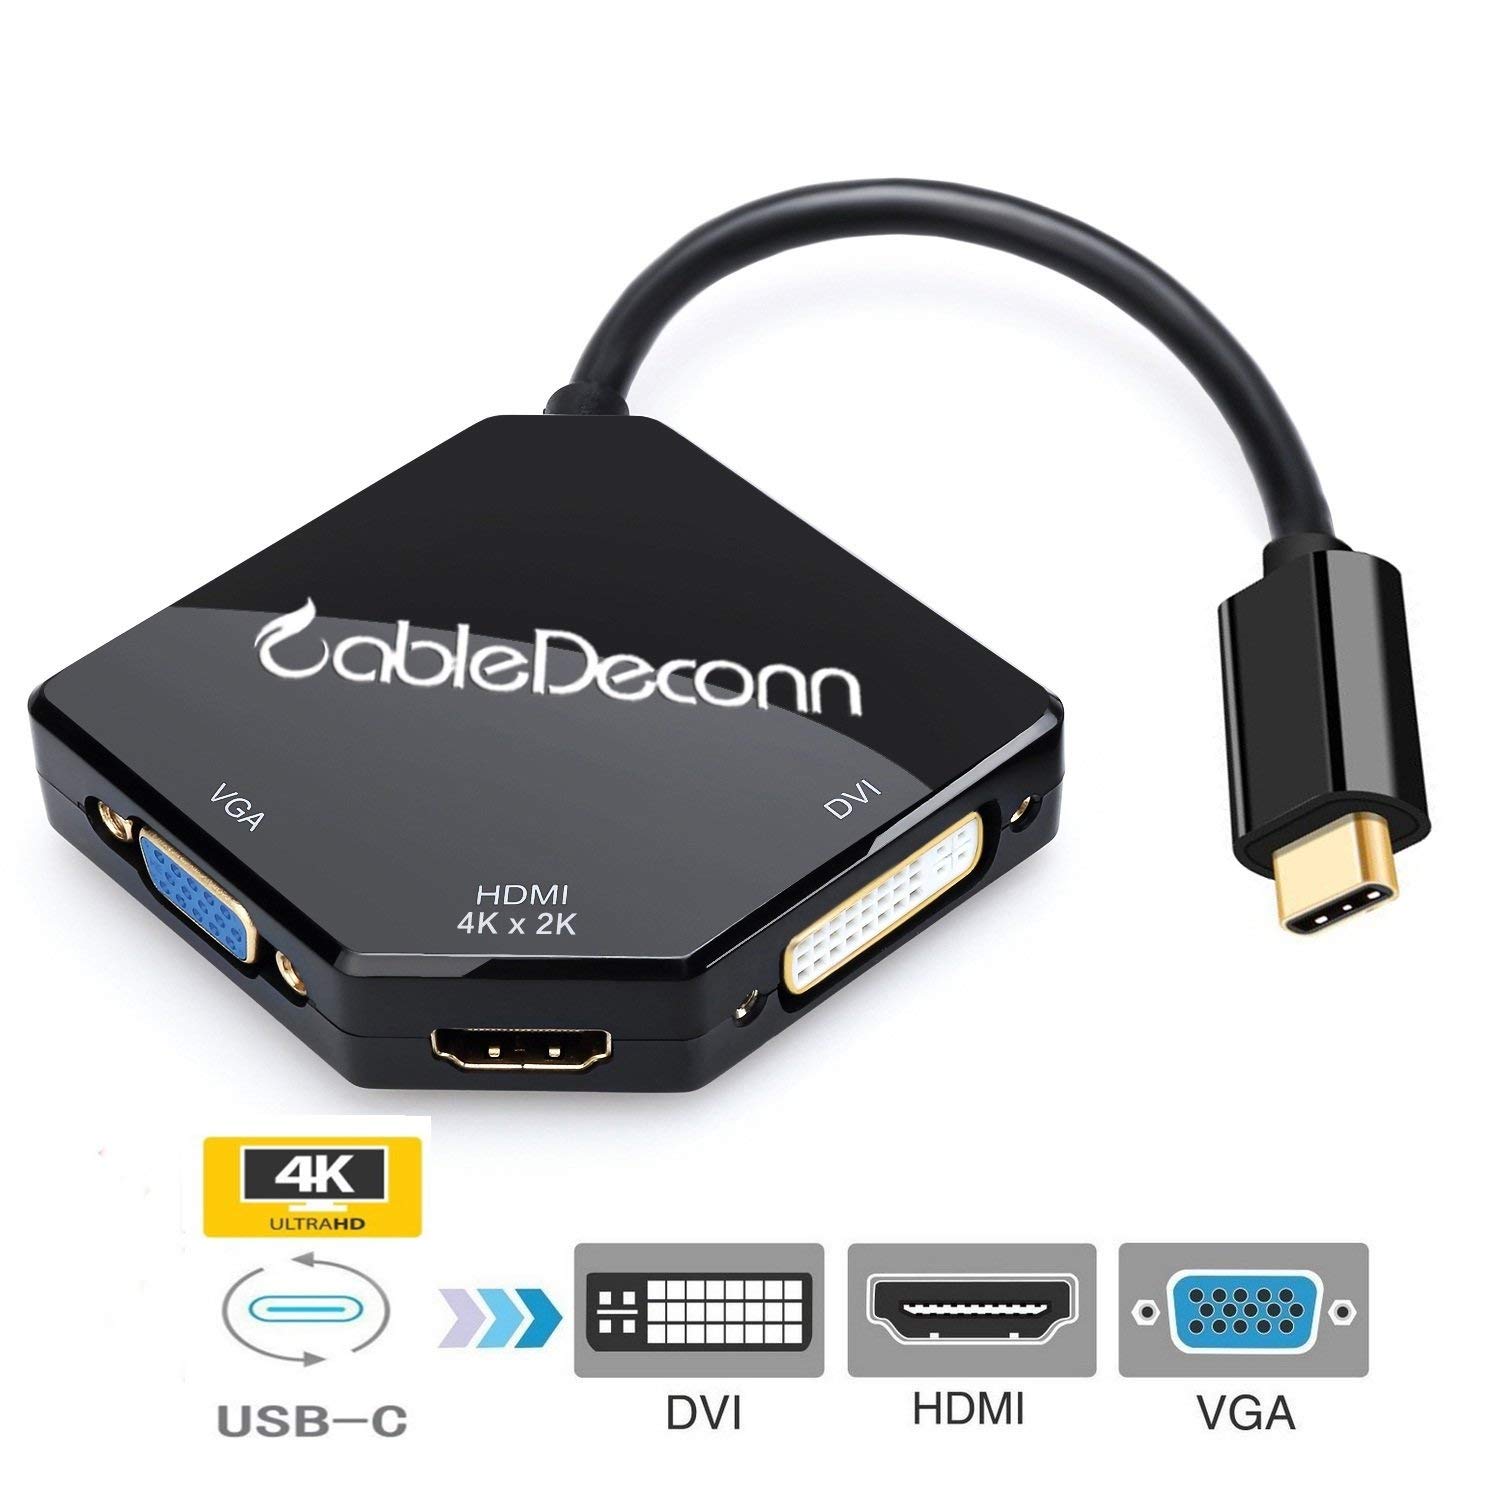 USB-C to HDMI VGA DVI Multiport Adapter,CableDeconn Thunderbolt 3 Type-c HDMI 4K 3IN1 Multifunction Cable Converter C Adapter-CableDeconn